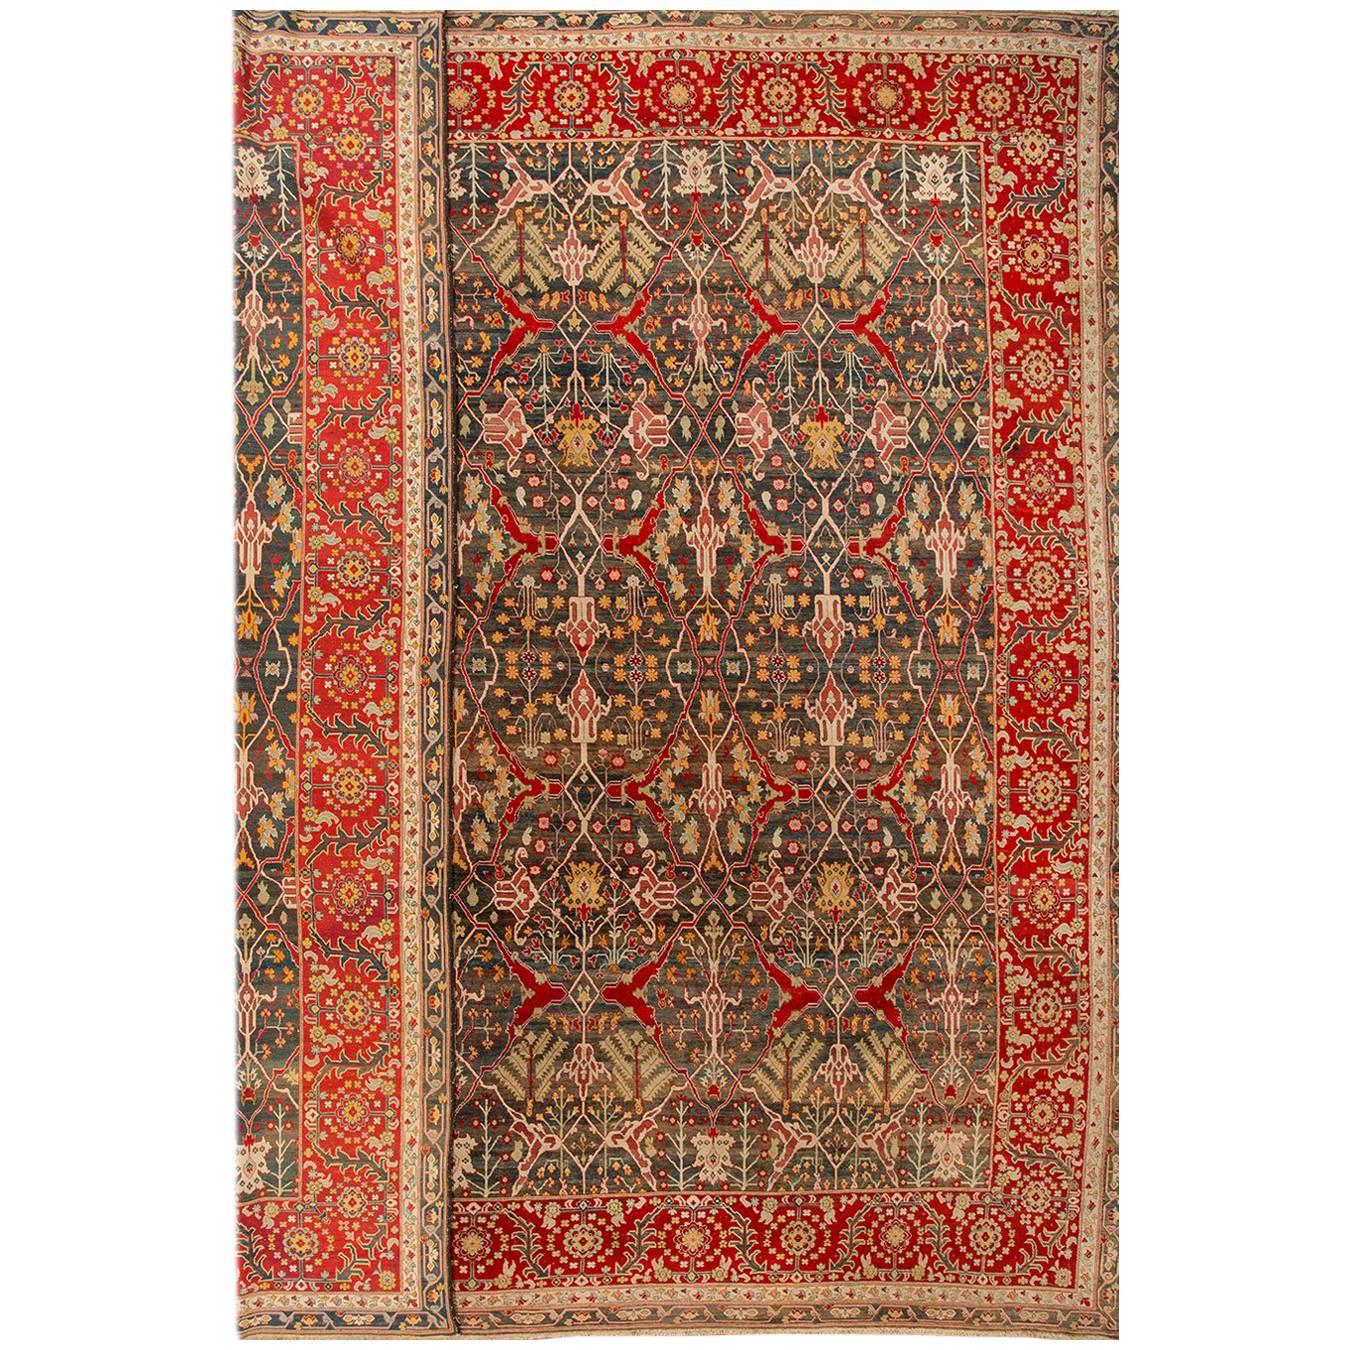 Exceptional late 19th century Indian Agra carpet with a multicolored field (visible notes of red, oxidized blue). Measures: 14.10 x 17.07.